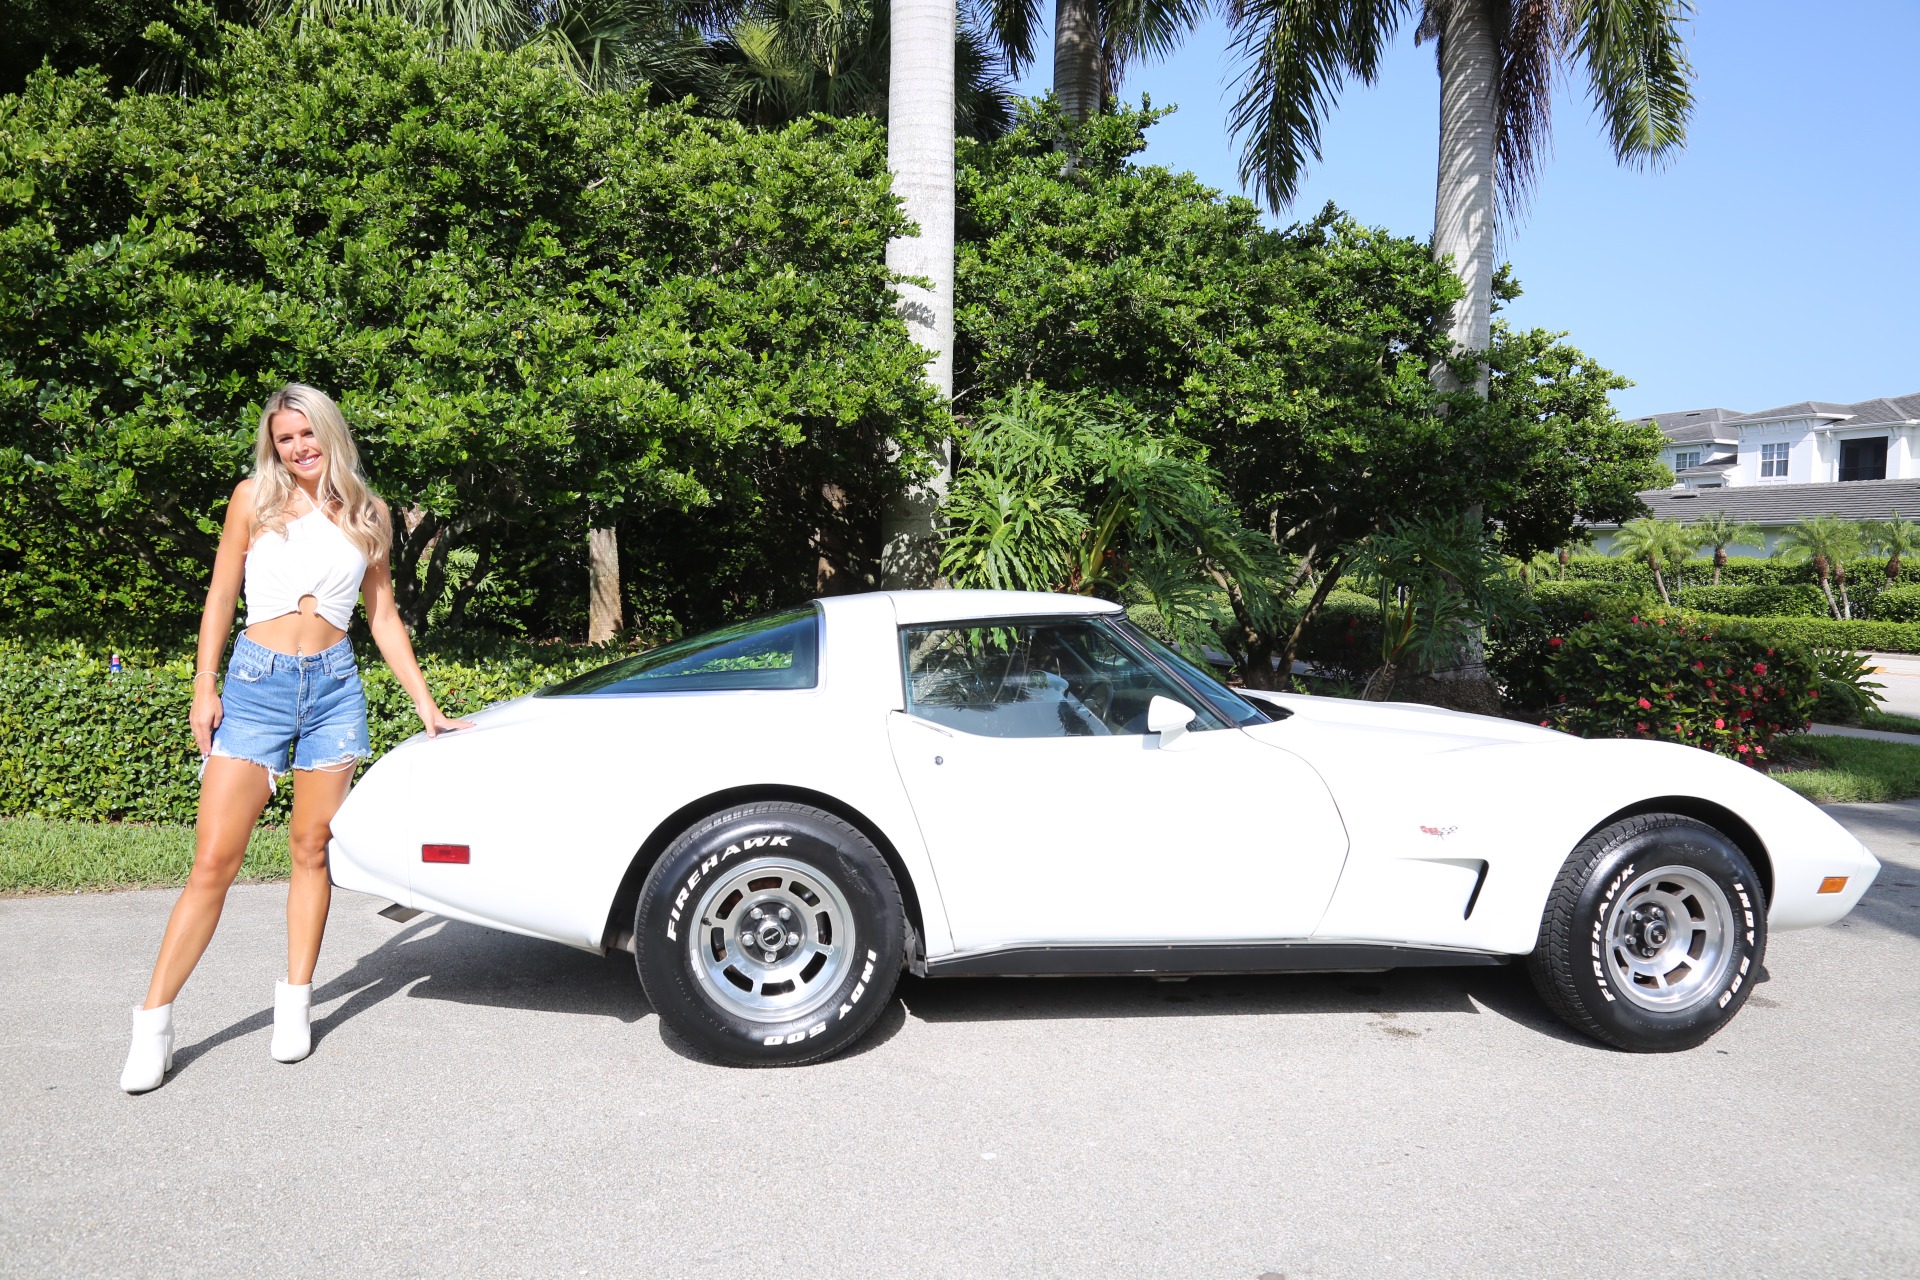 Used 1978 Chevrolet Corvette Anniversary Edition for sale $18,000 at Muscle Cars for Sale Inc. in Fort Myers FL 33912 3